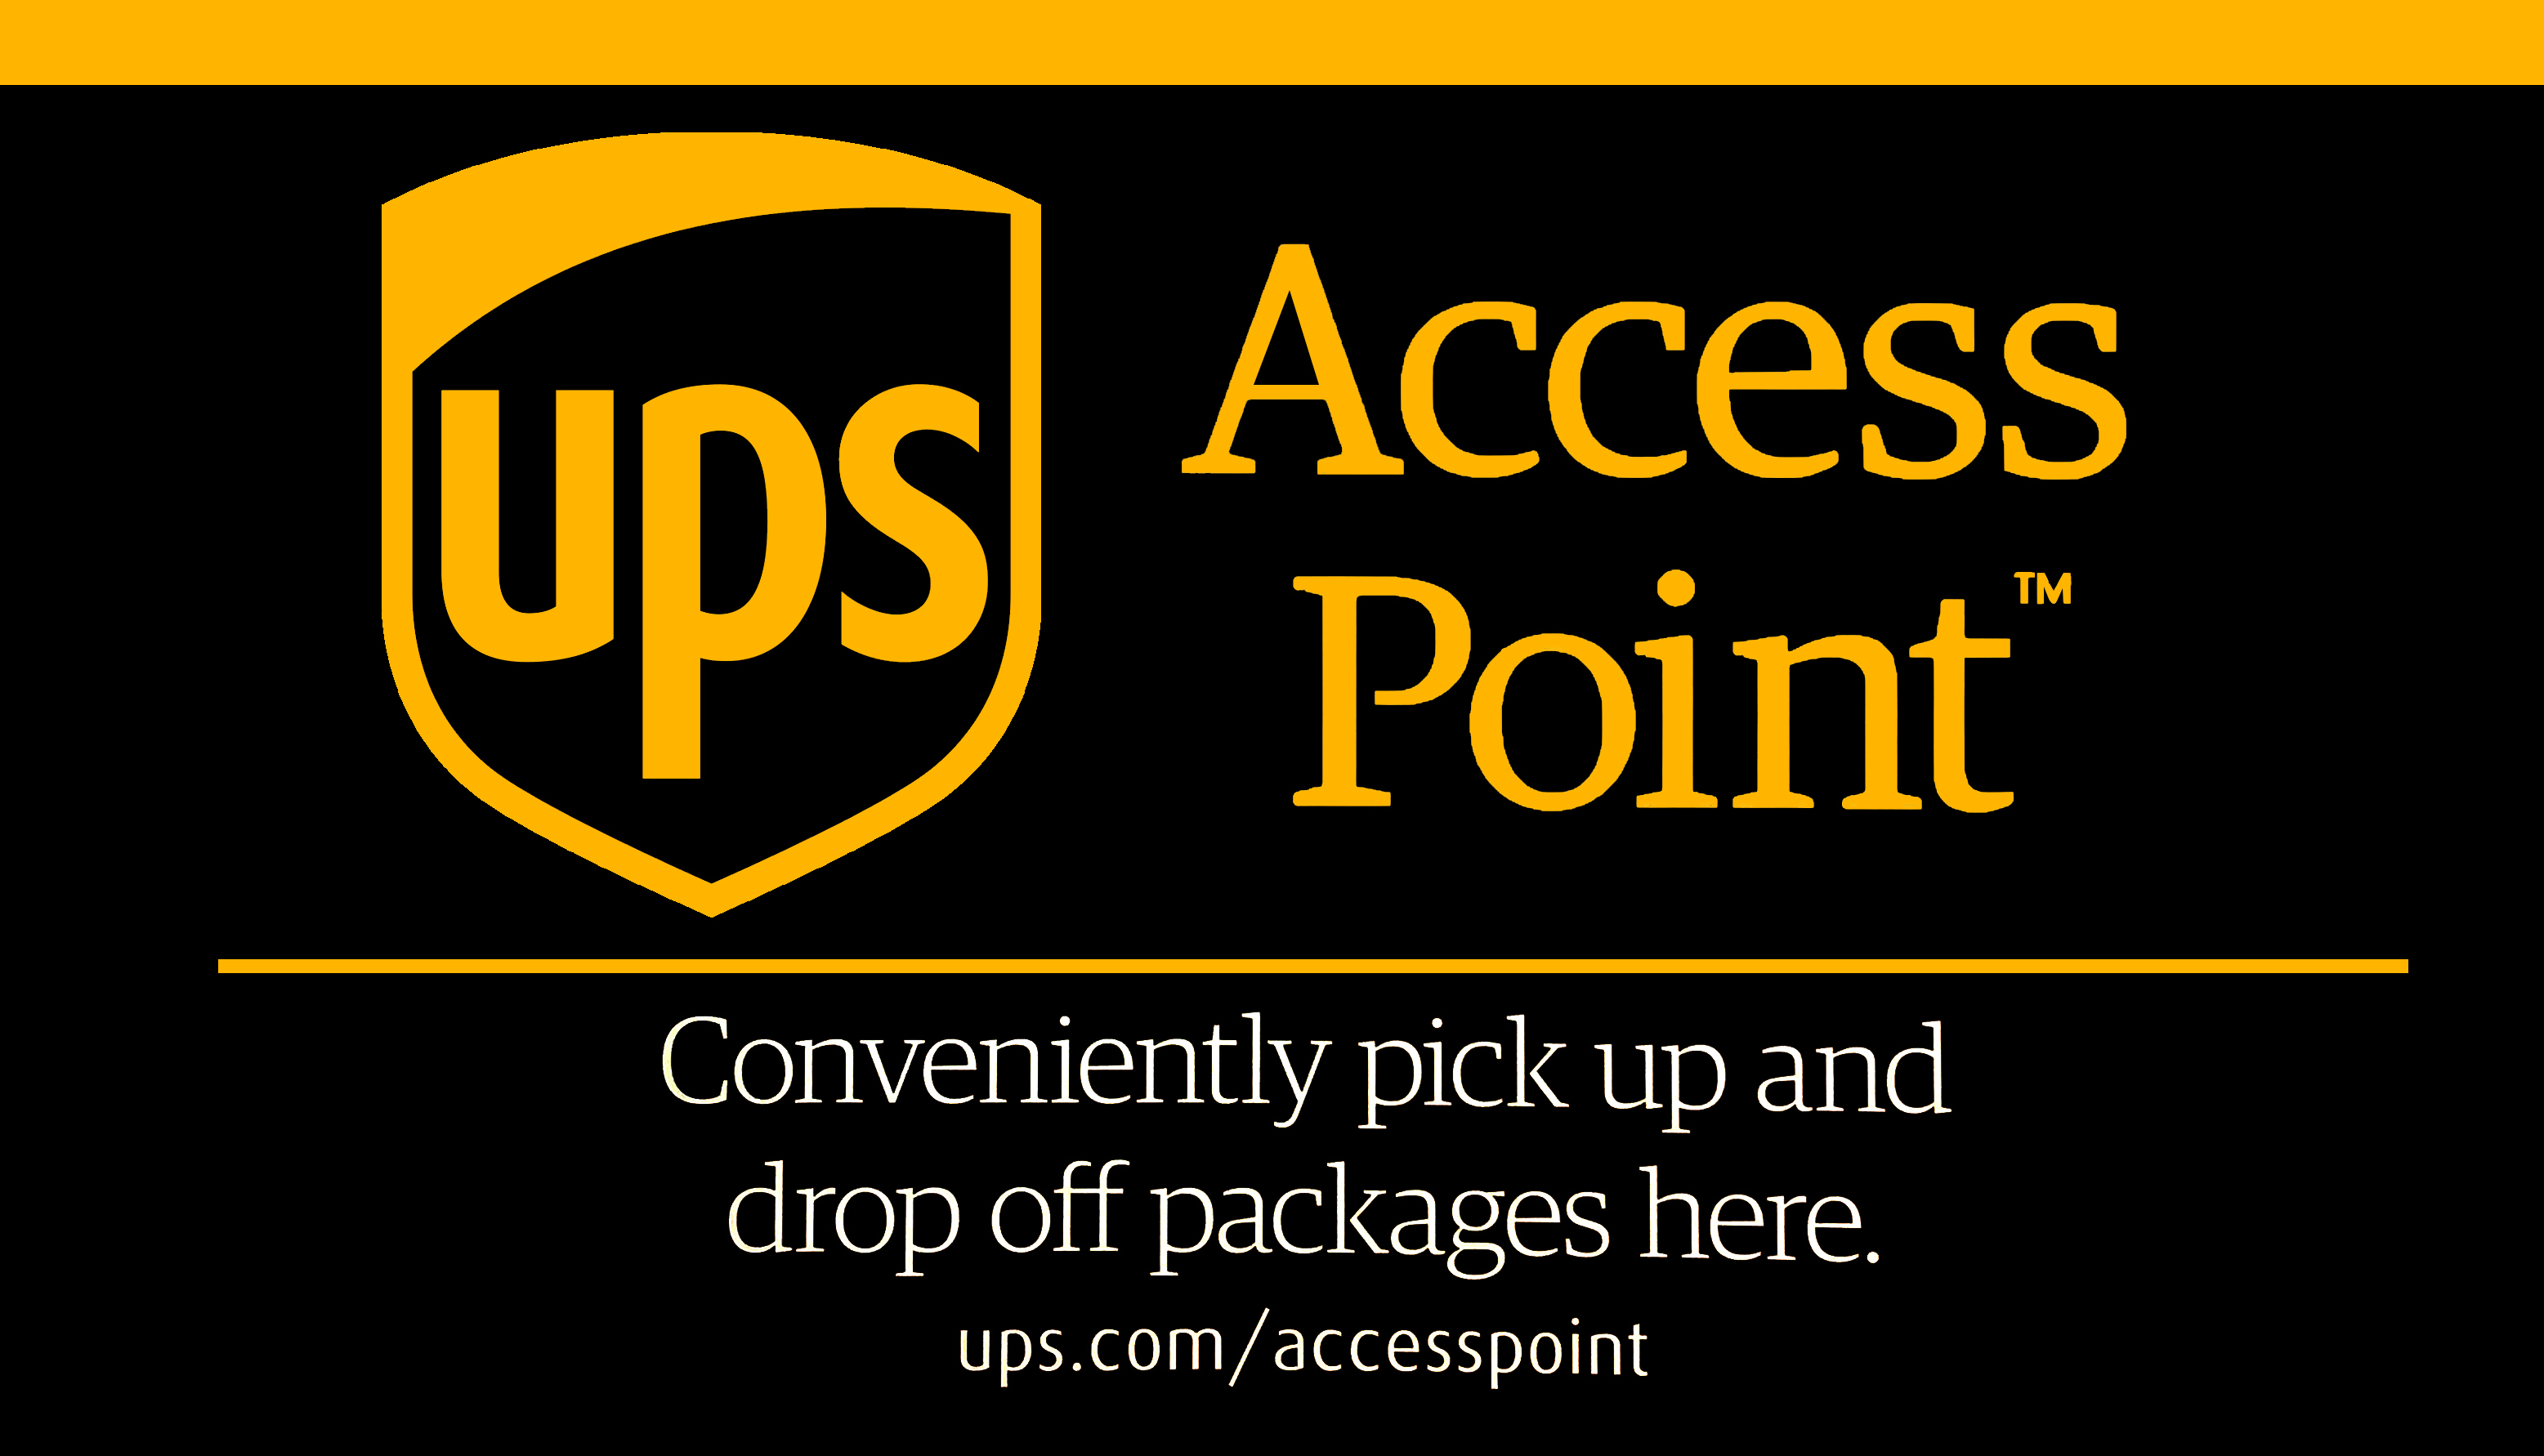 ups access point 11385